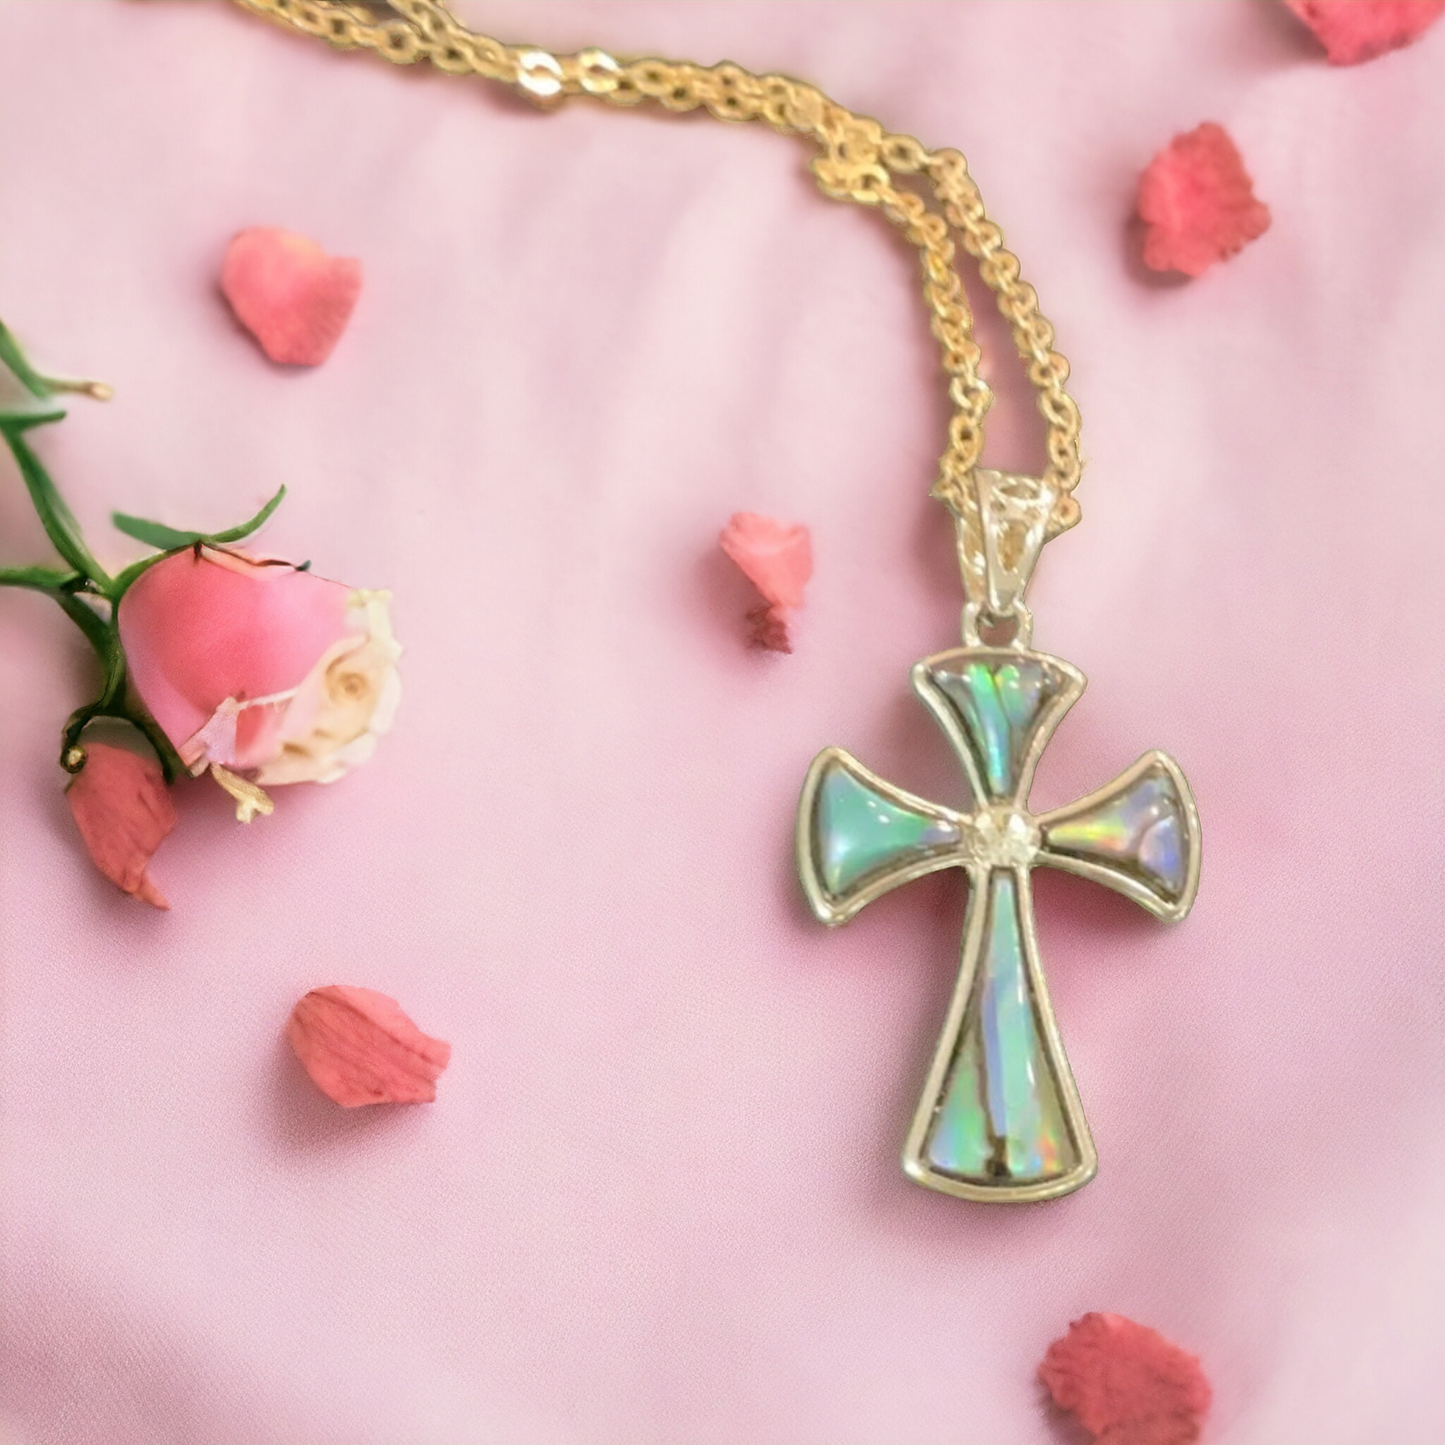 Abalone cross necklace